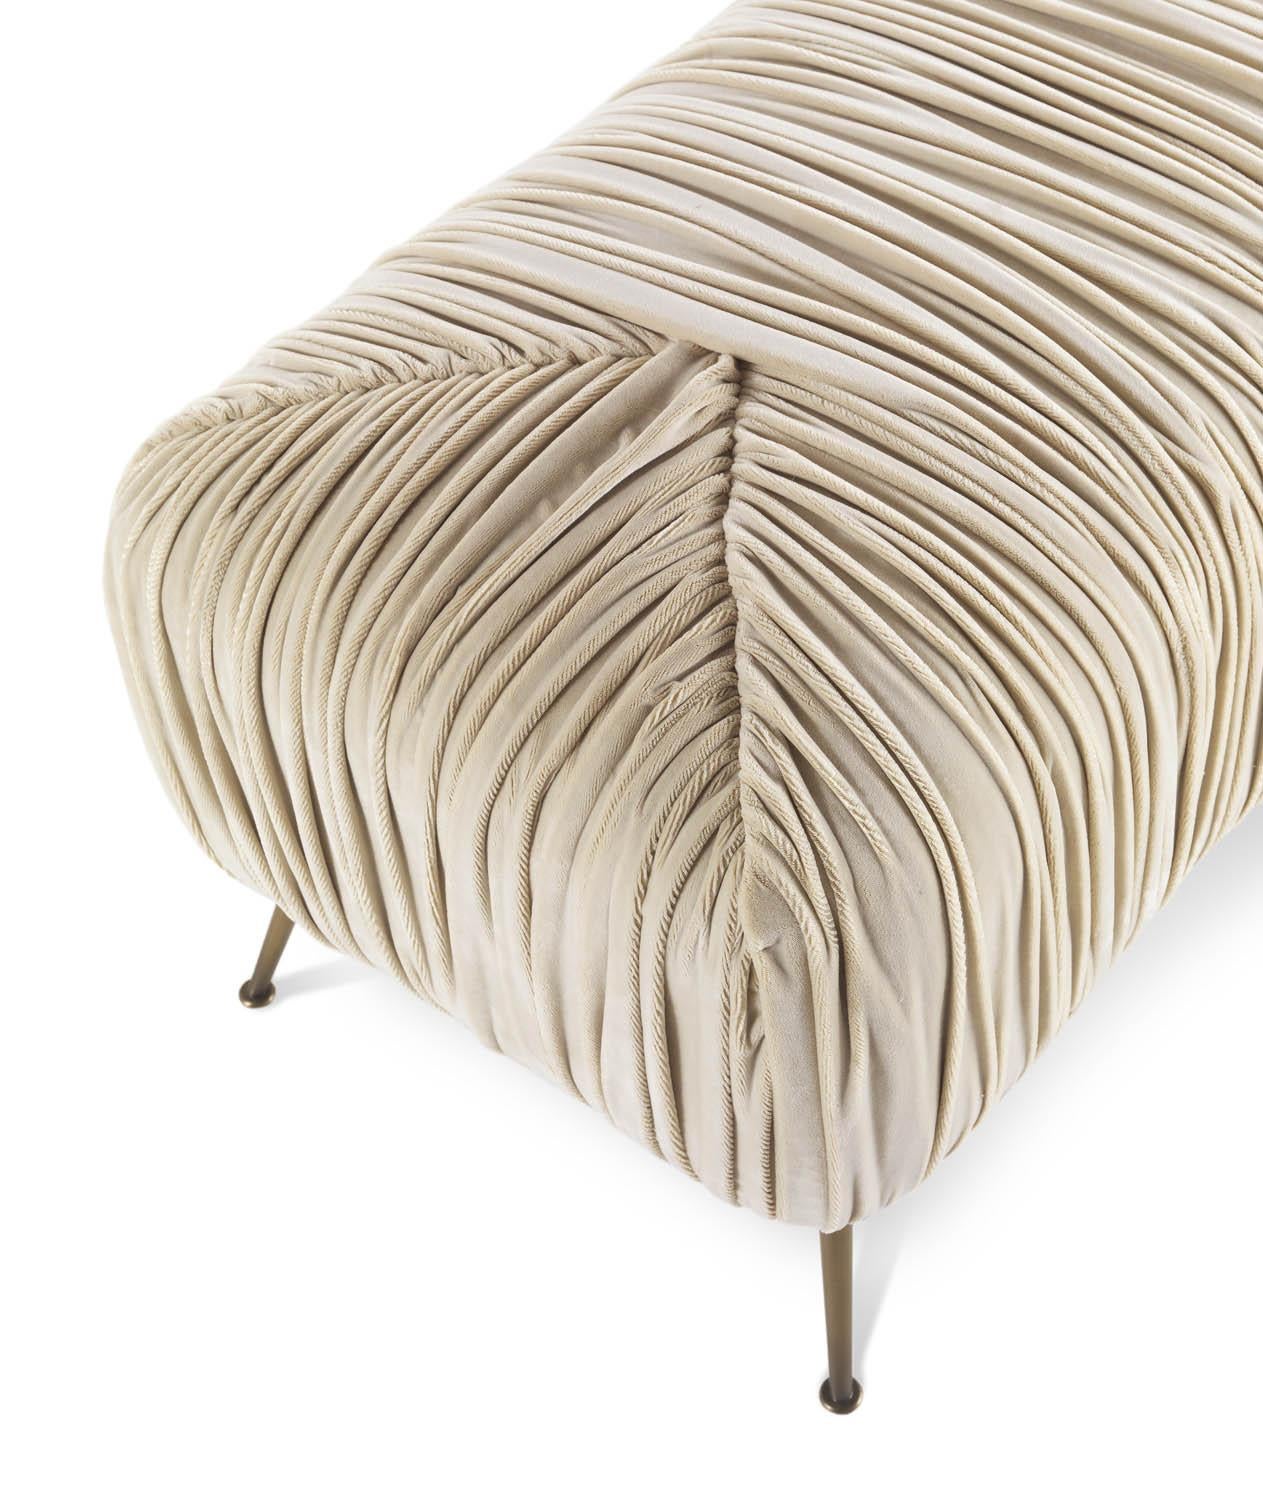 Versatile and original, Rowe pouf has brass feet which recall the 1950s and a special pleated padding with an original game of geometries resulting from the combination of trapezoidal shapes. The upholstery in thick velvet highlights the shapes of